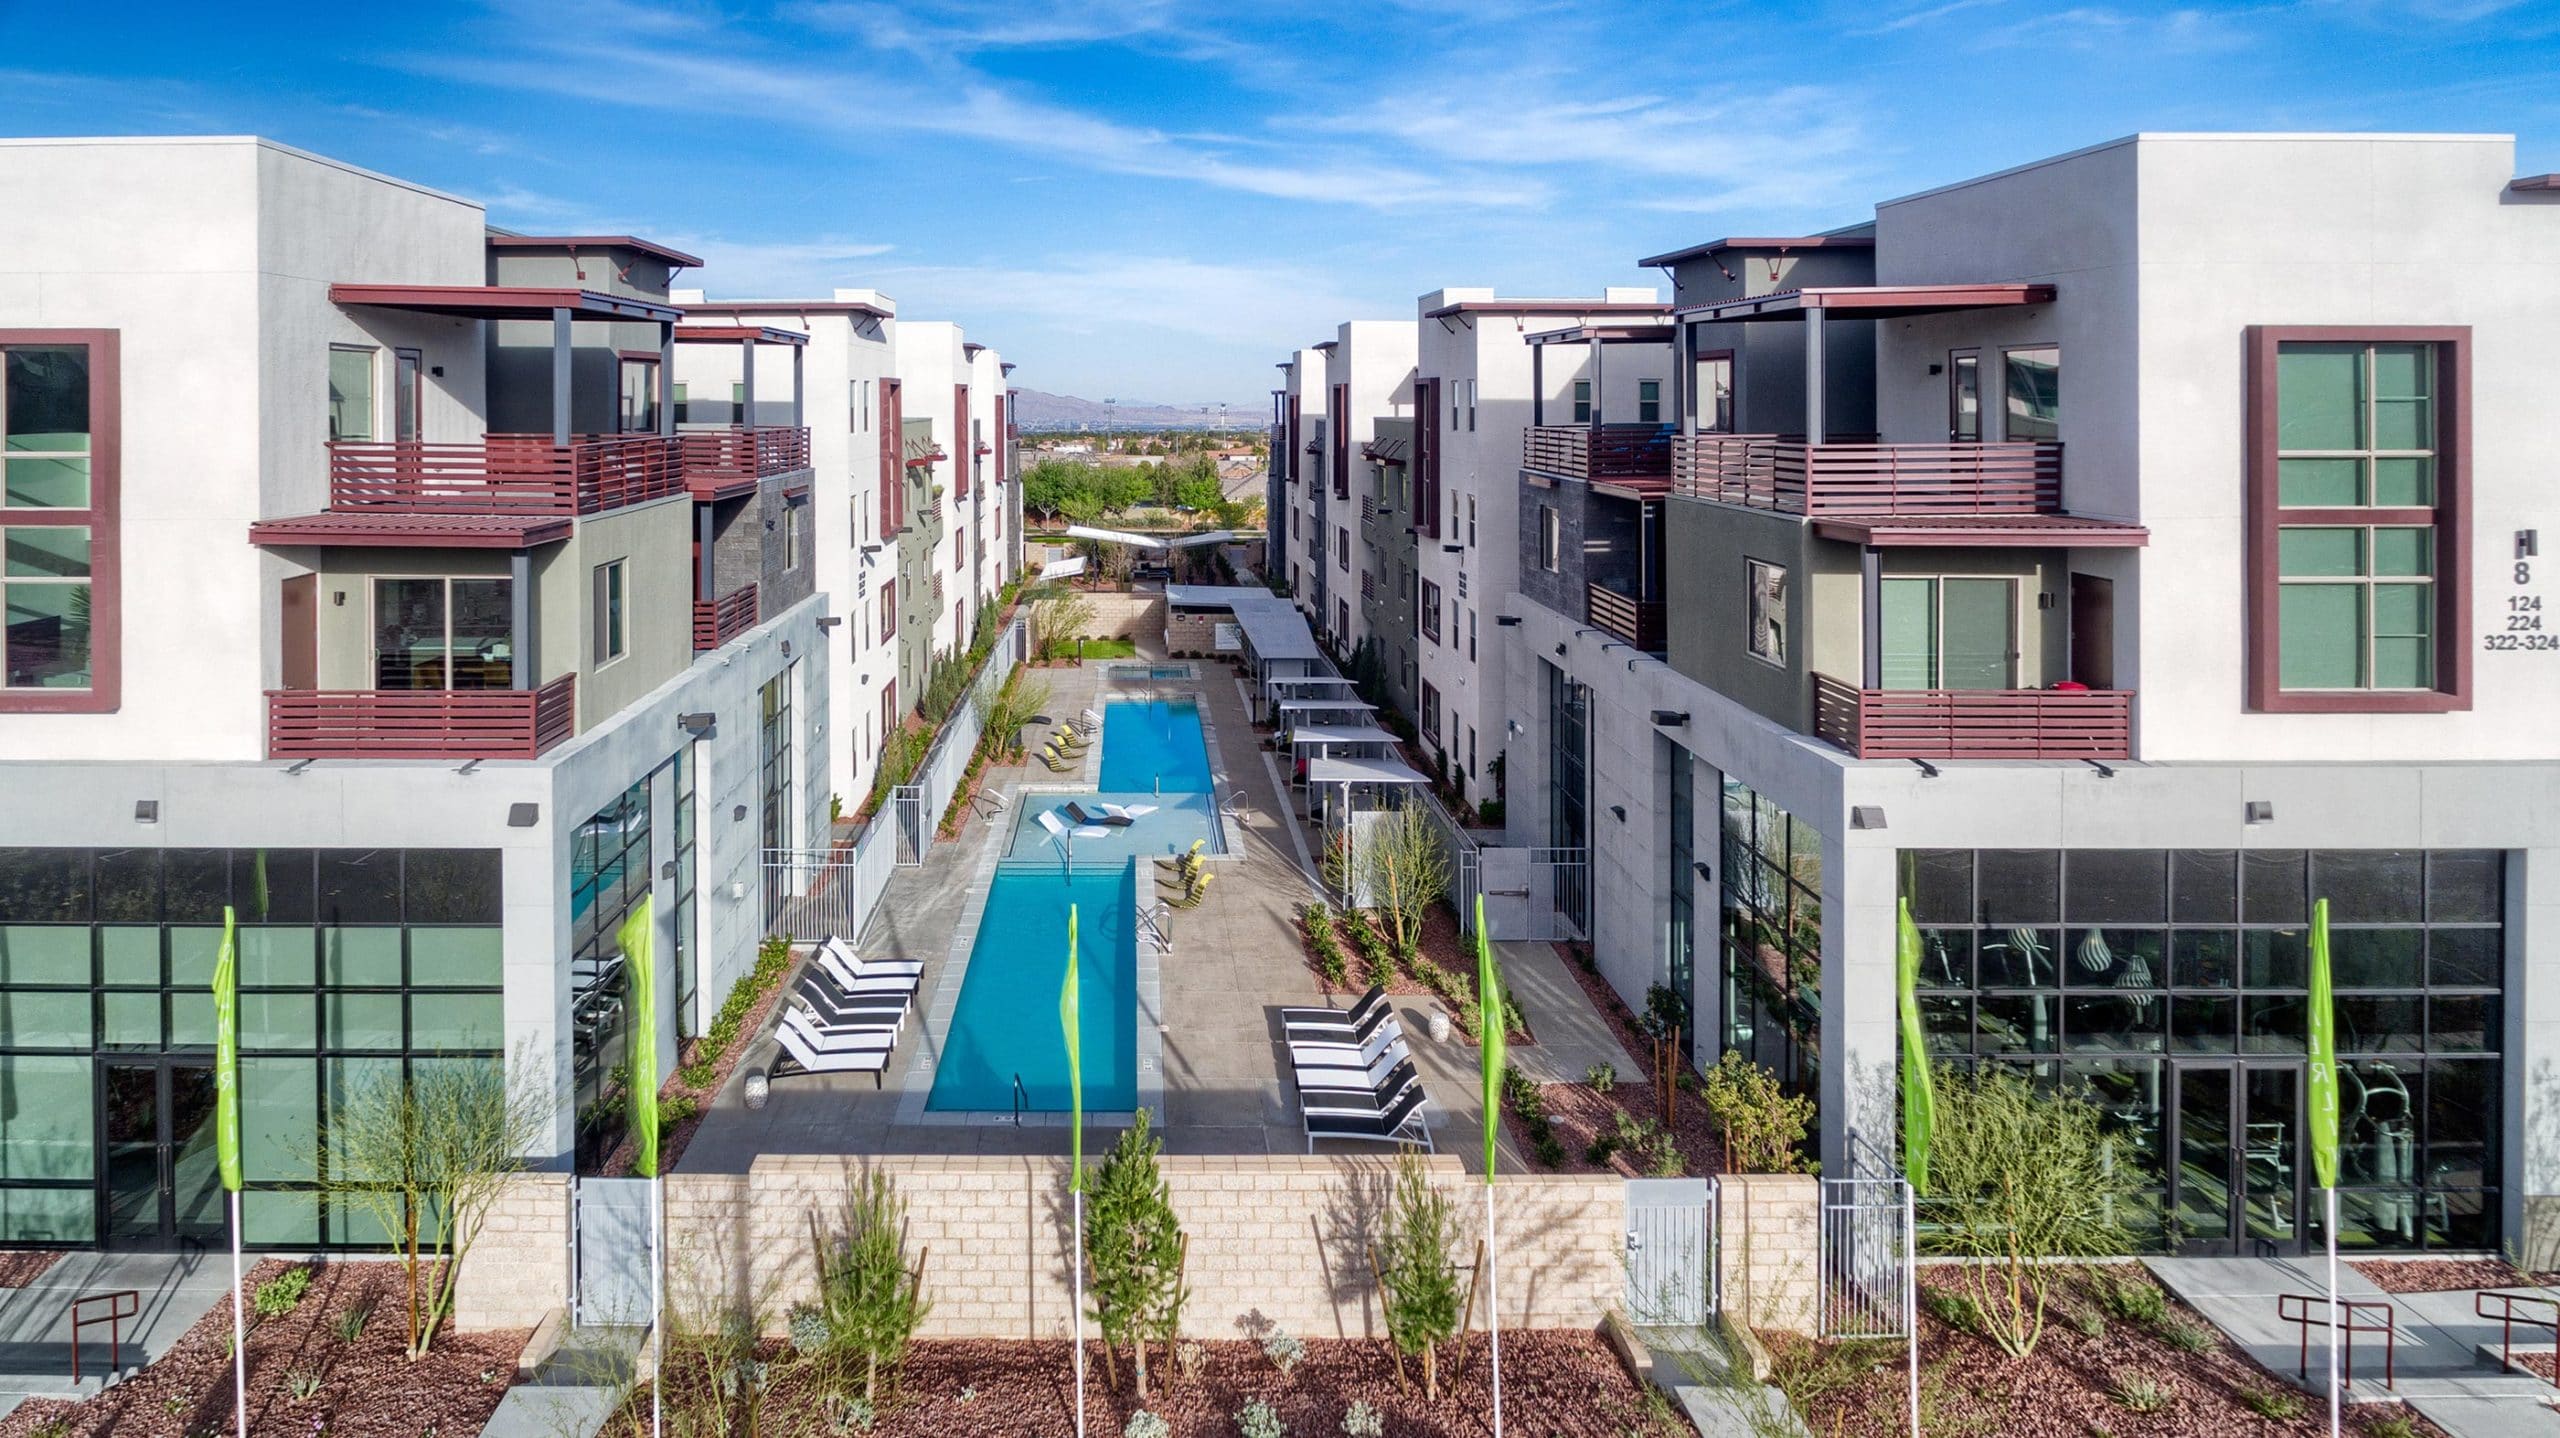 Constellation apartments in Downtown Summerlin